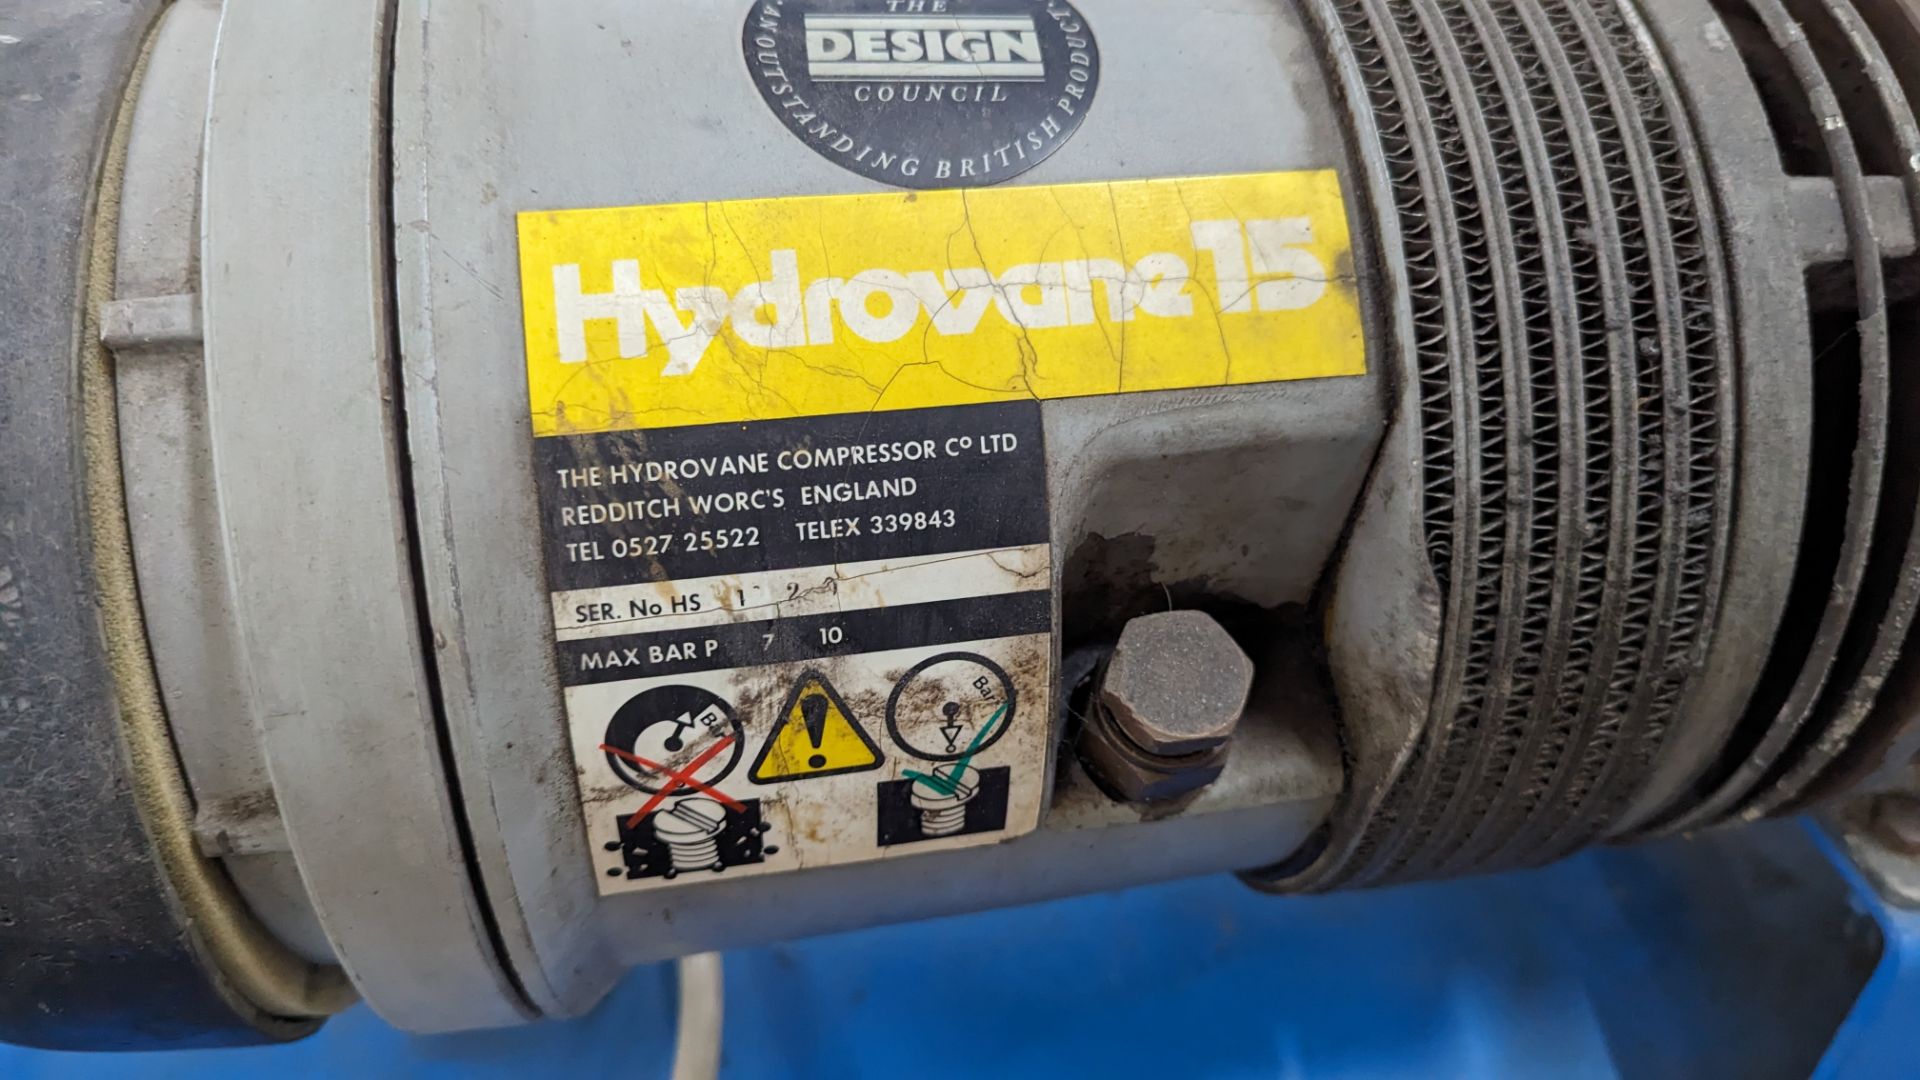 Hydrovane all in one compressor with welded horizontal air receiver, mounted on heavy duty metal tab - Image 10 of 11